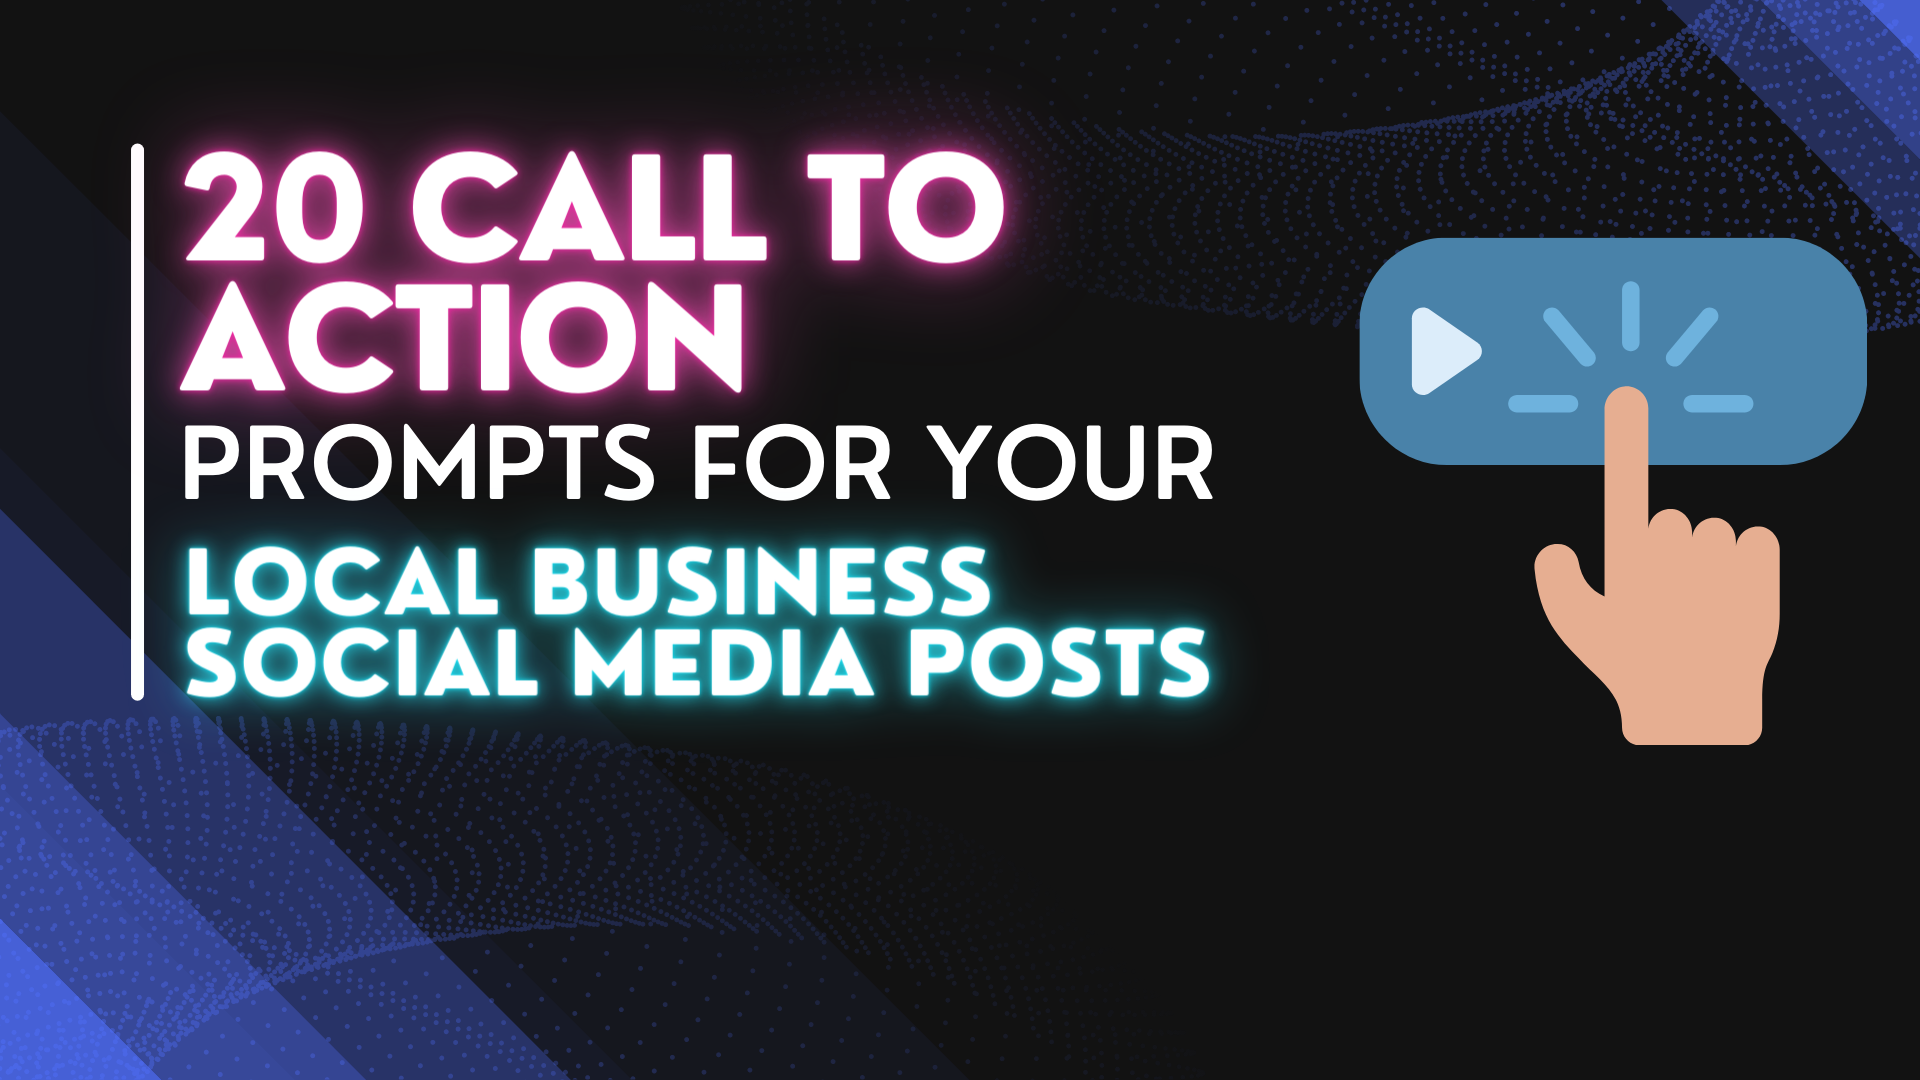 20 Amazing Social Media Call To Action Prompts For Local Businesses